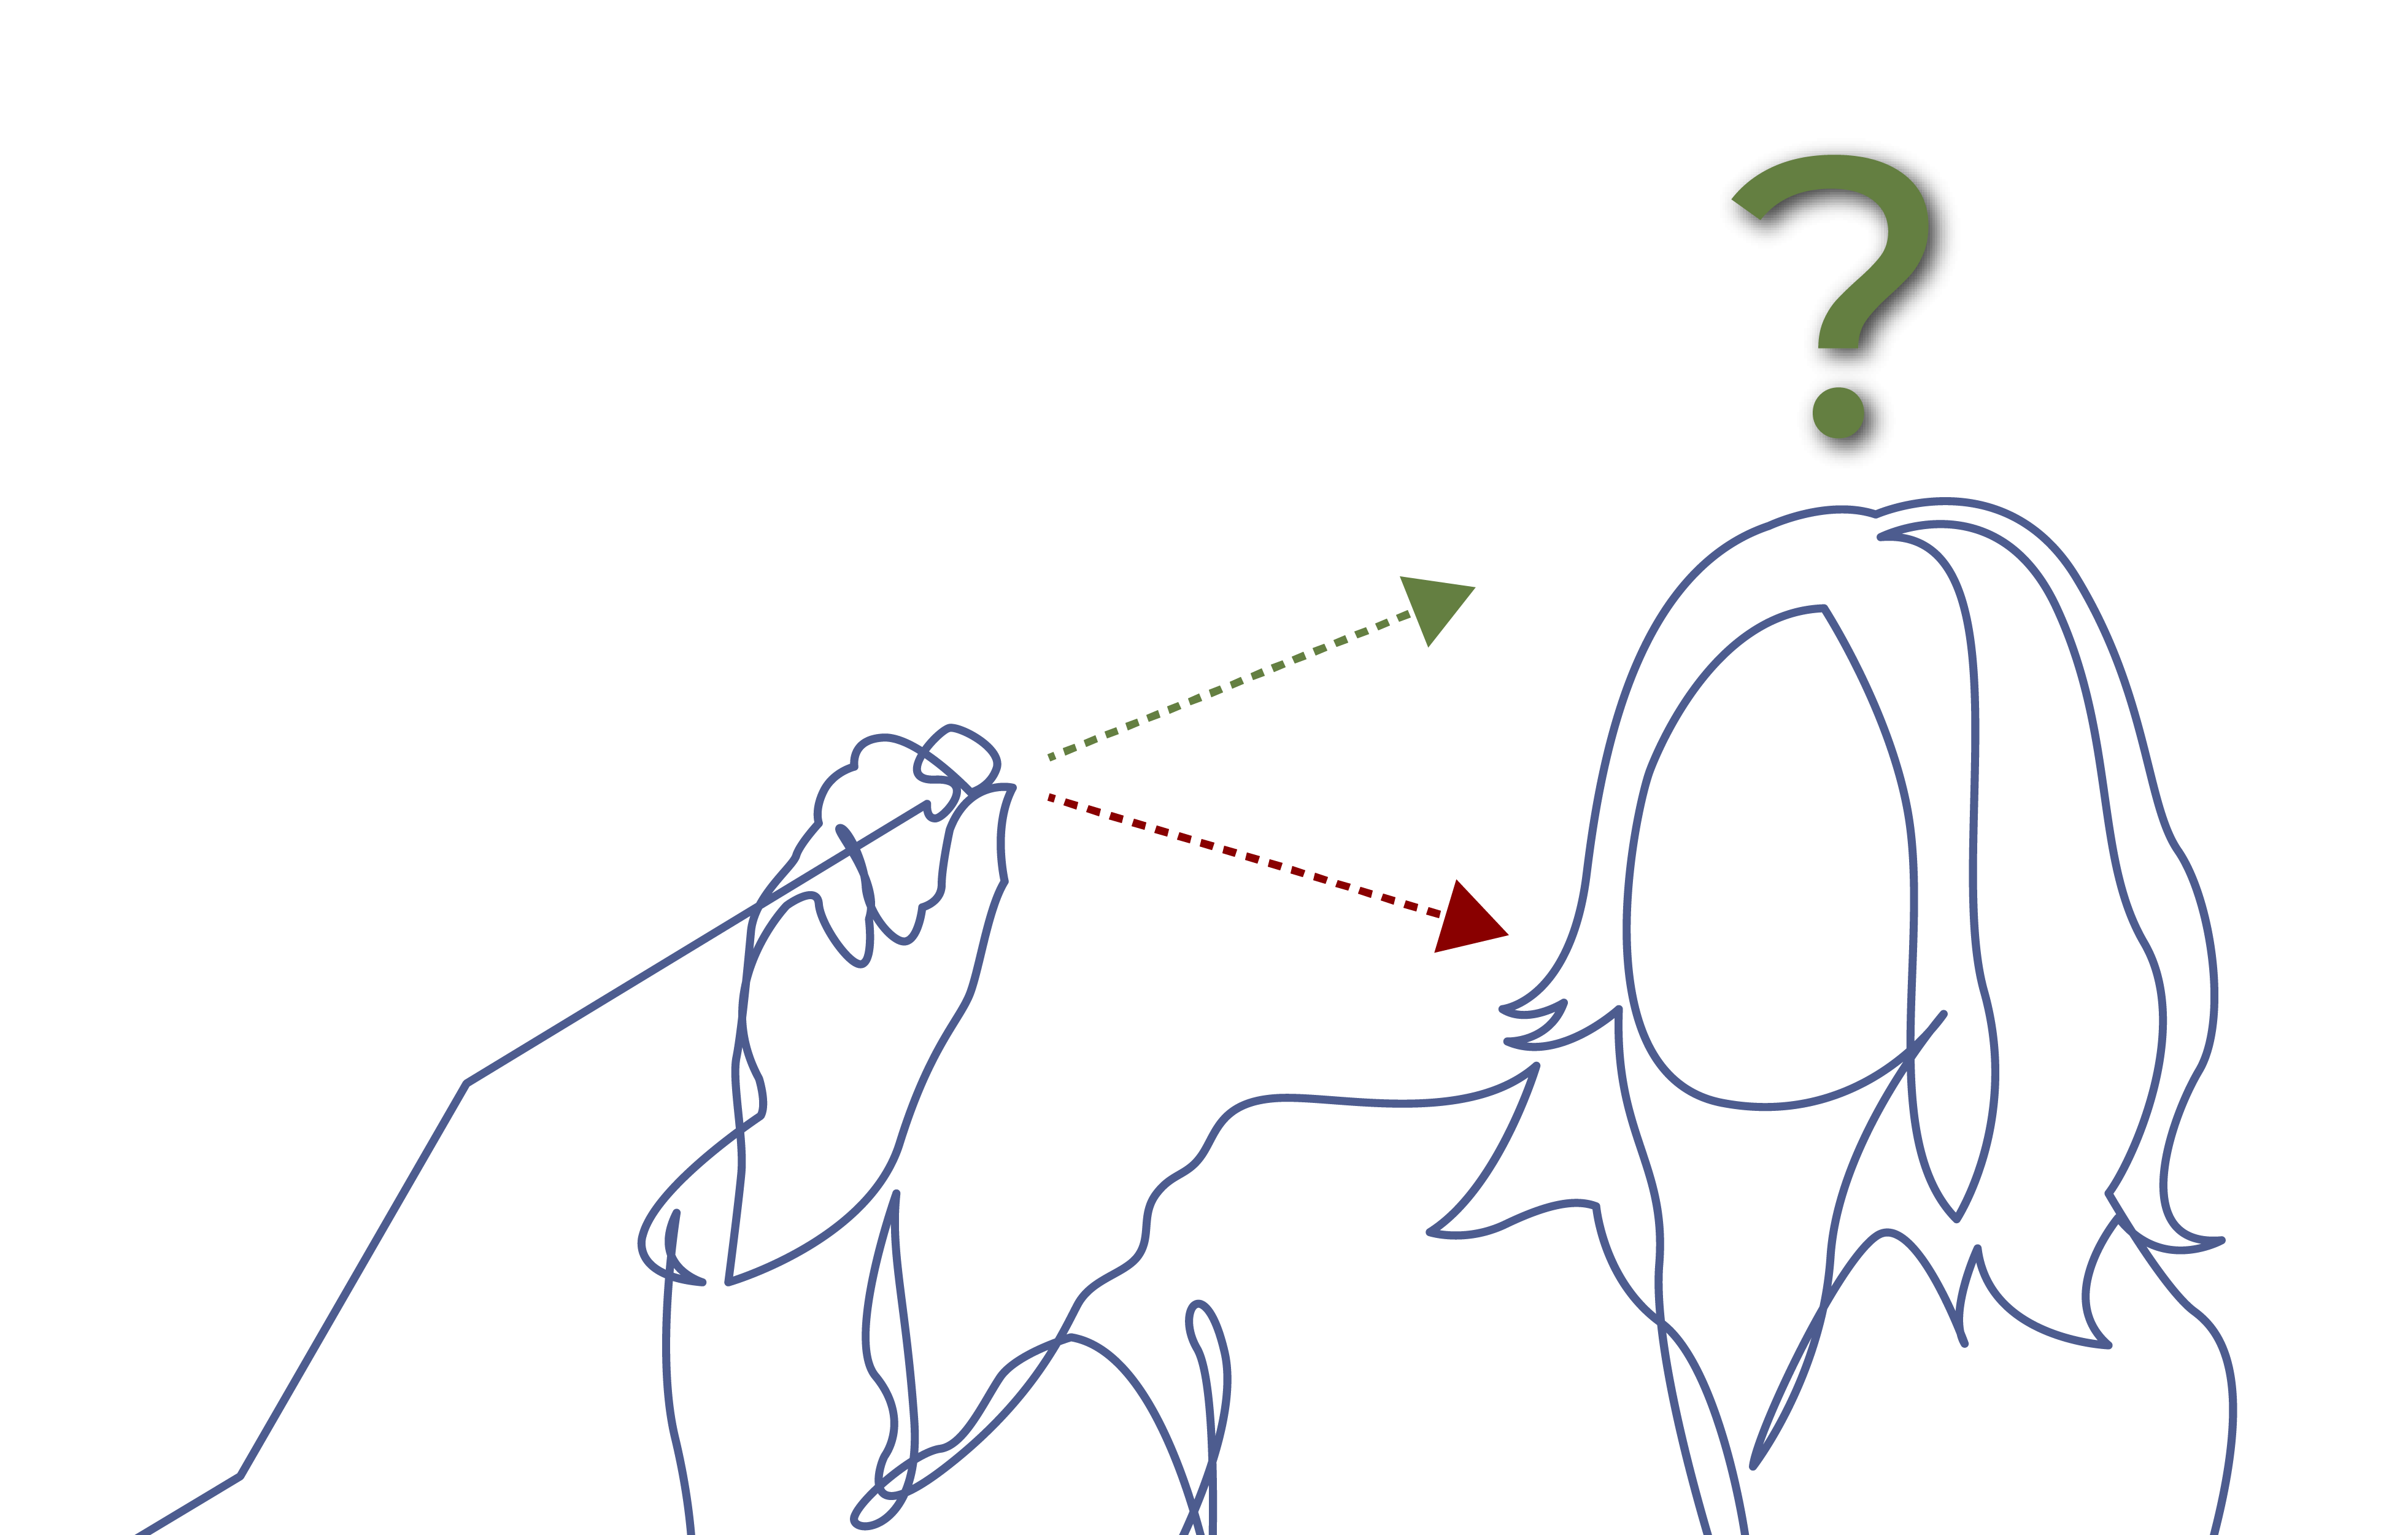 A sketch of a woman with a question mark over her head, drawing a trend line, showing the possibility of the trend line going either up or down.